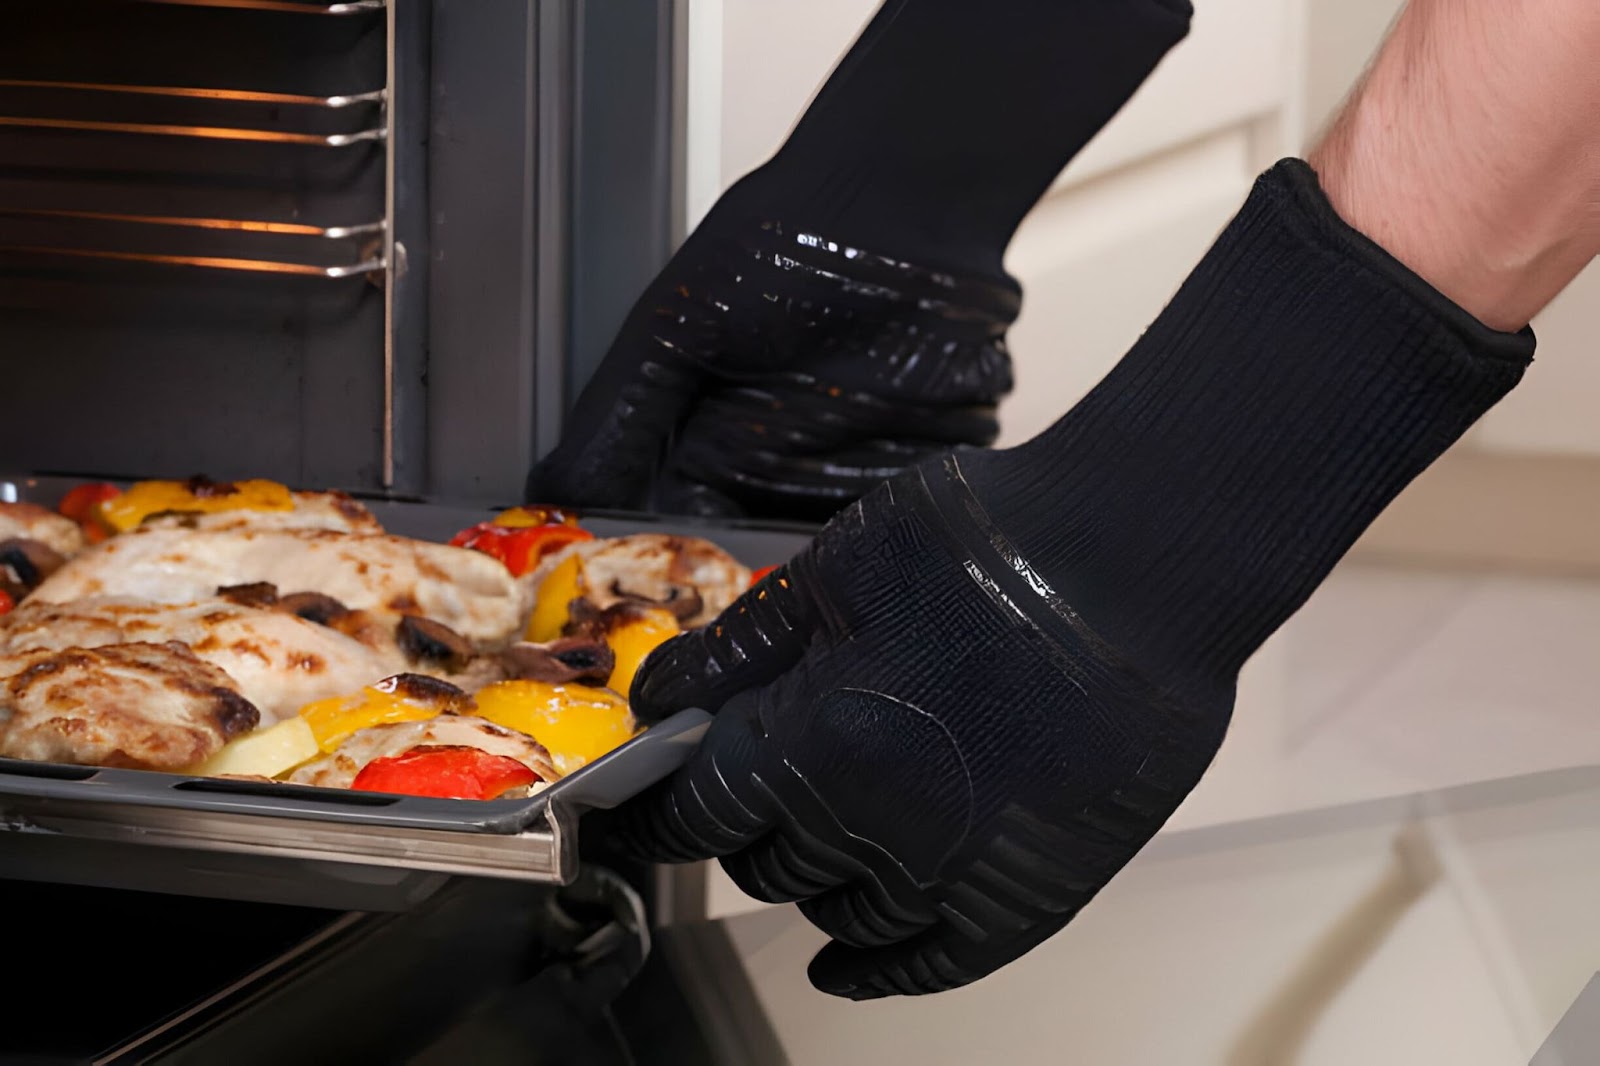 Heat Resistant Gloves for Cooking